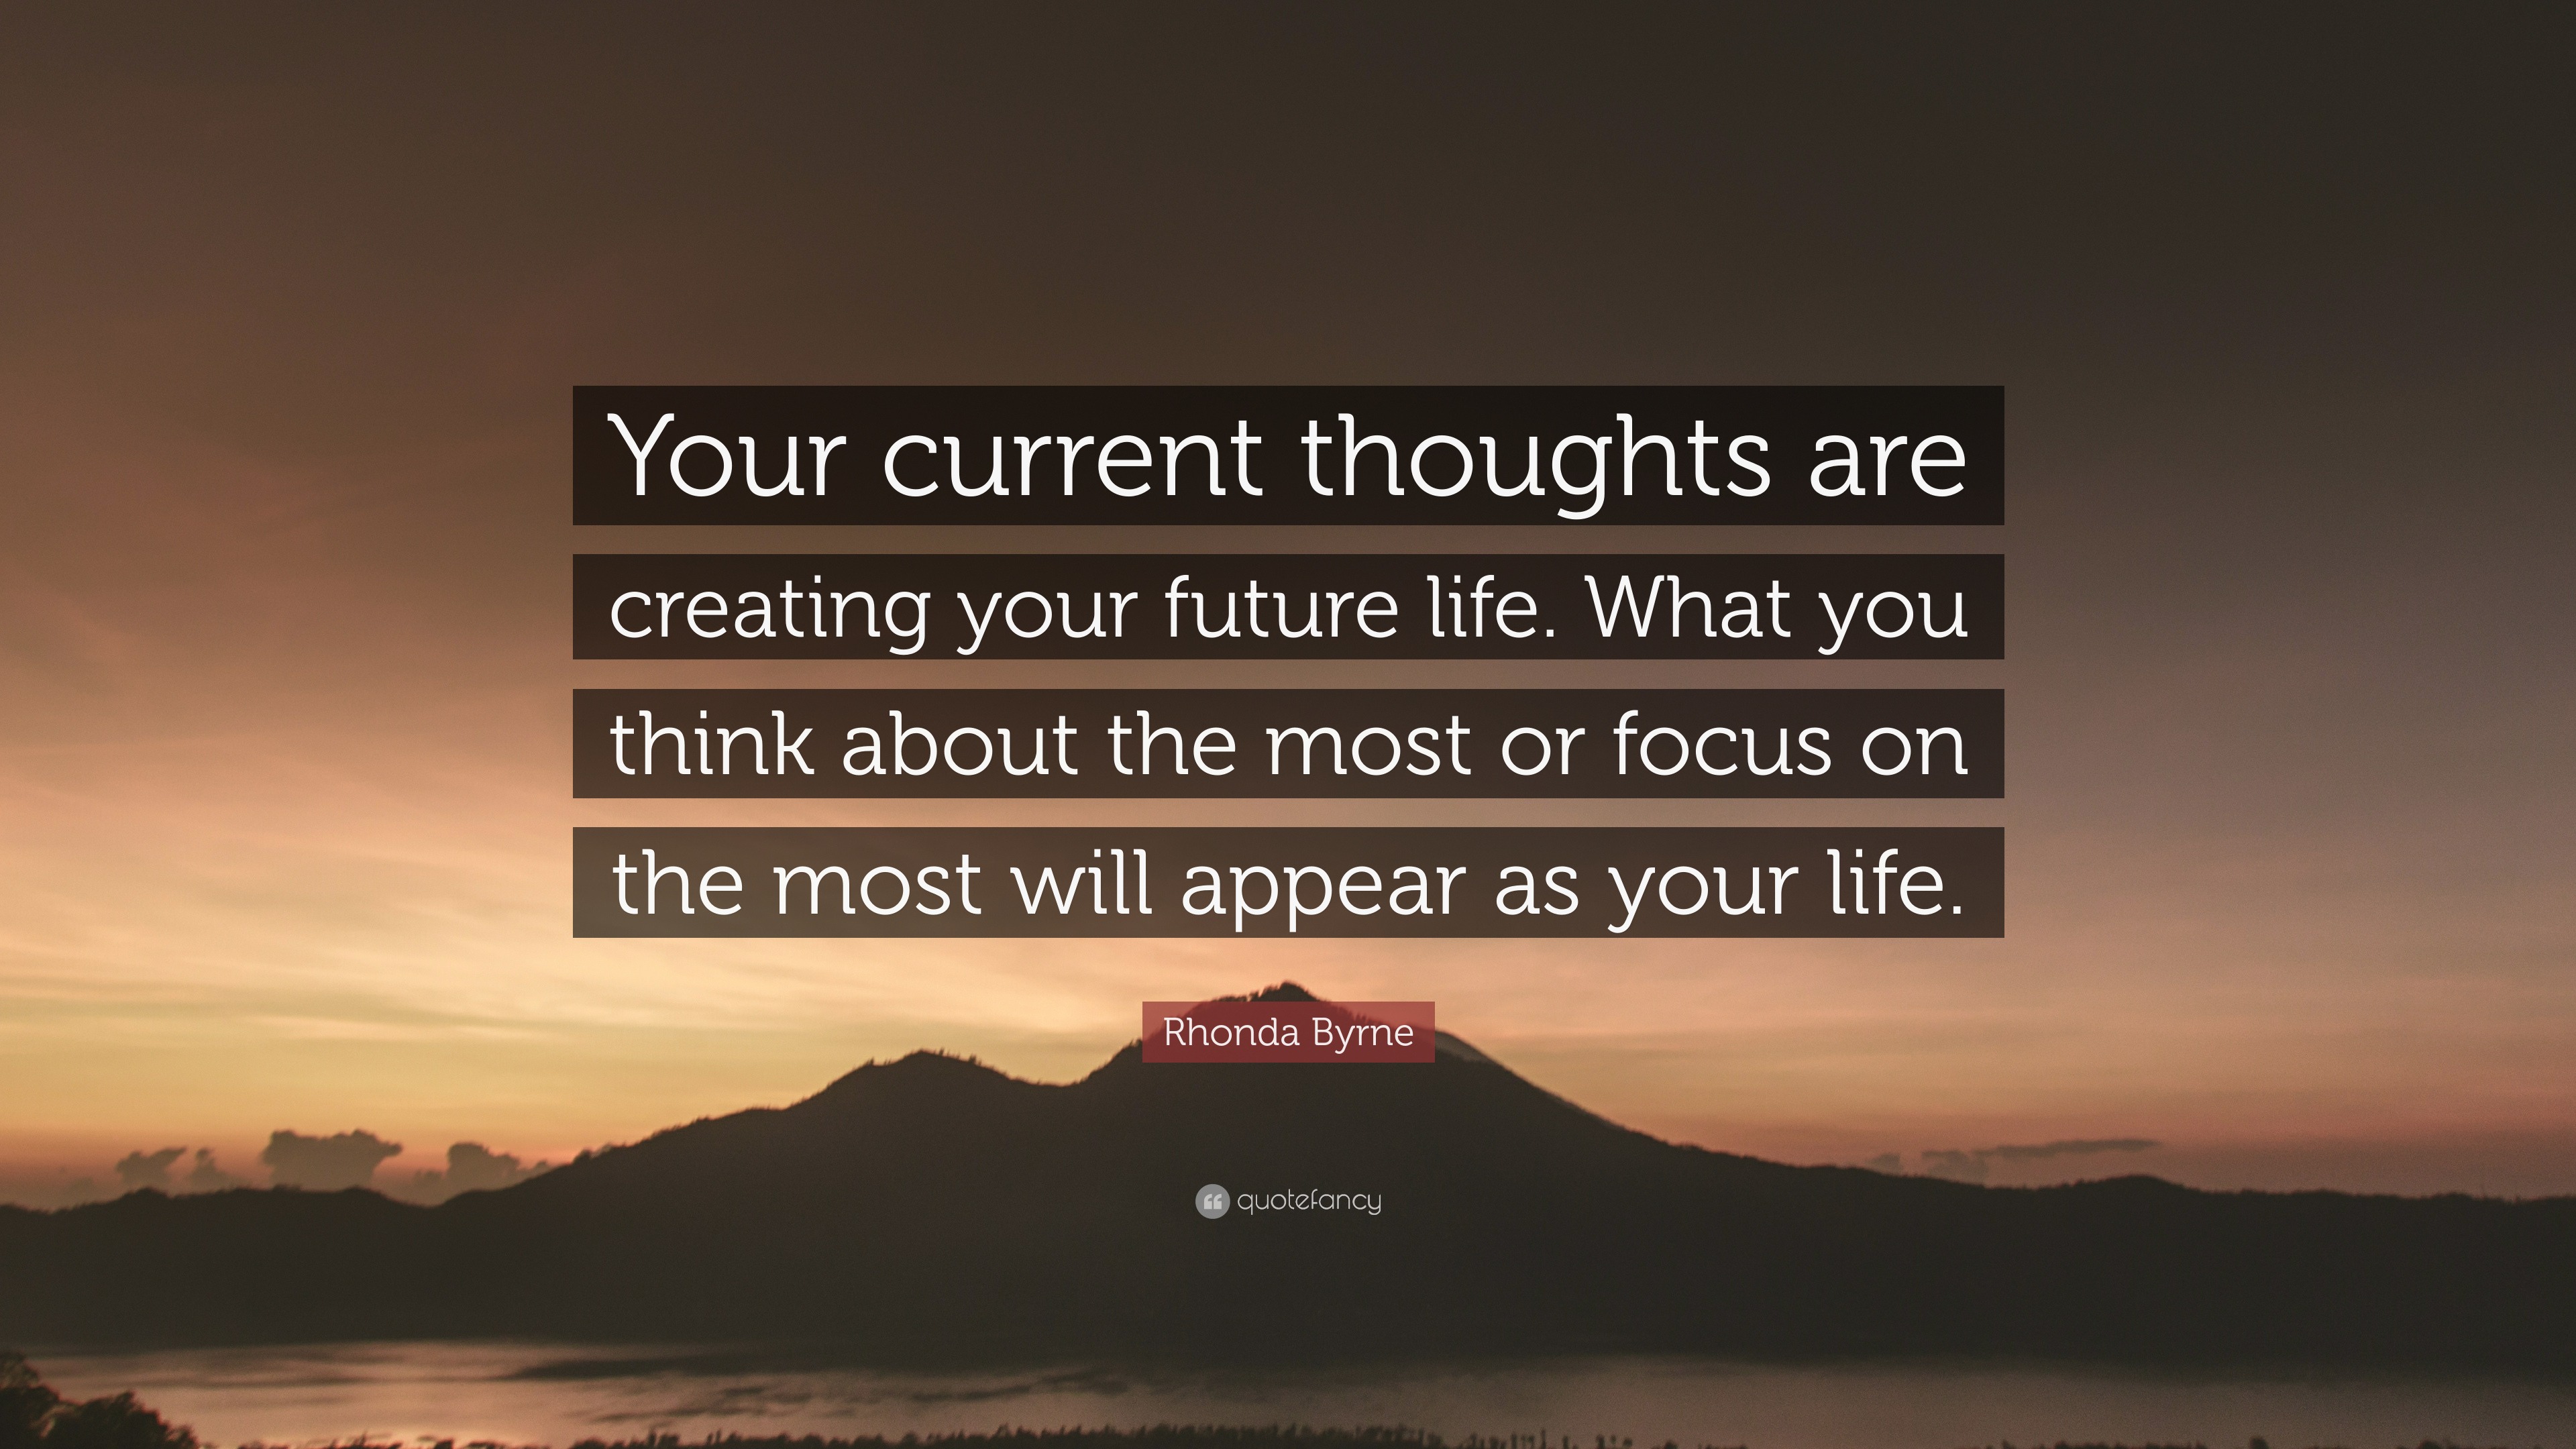 a positive thoughts quotes about your future